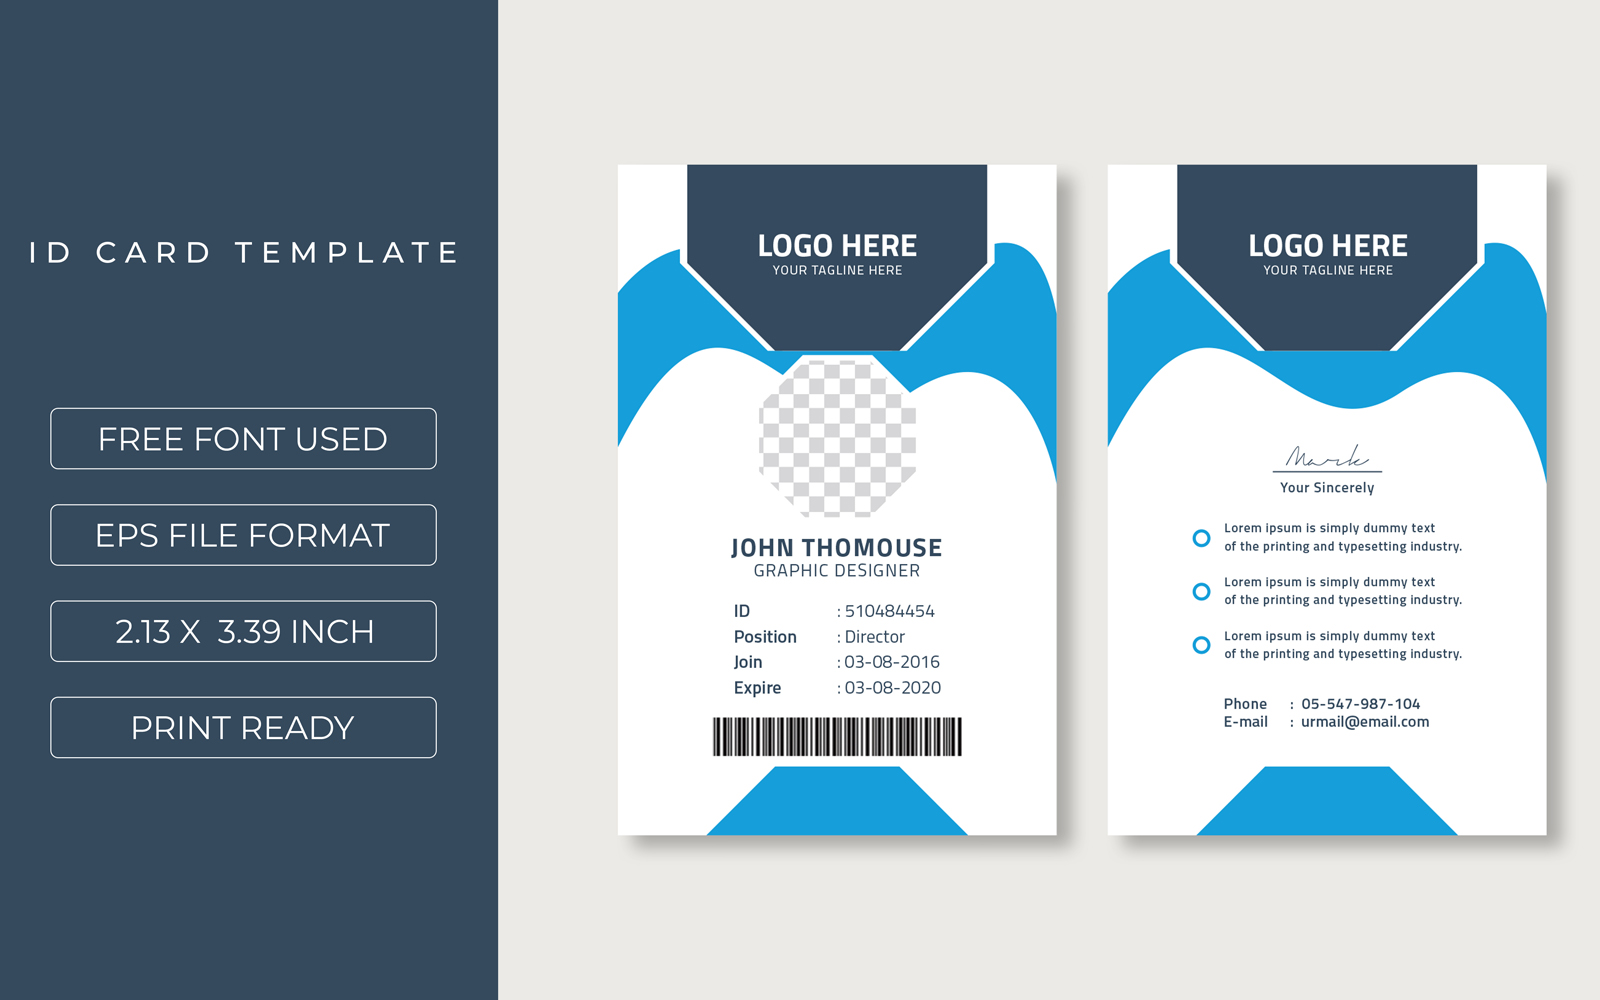 Office ID Card Corporate identity template